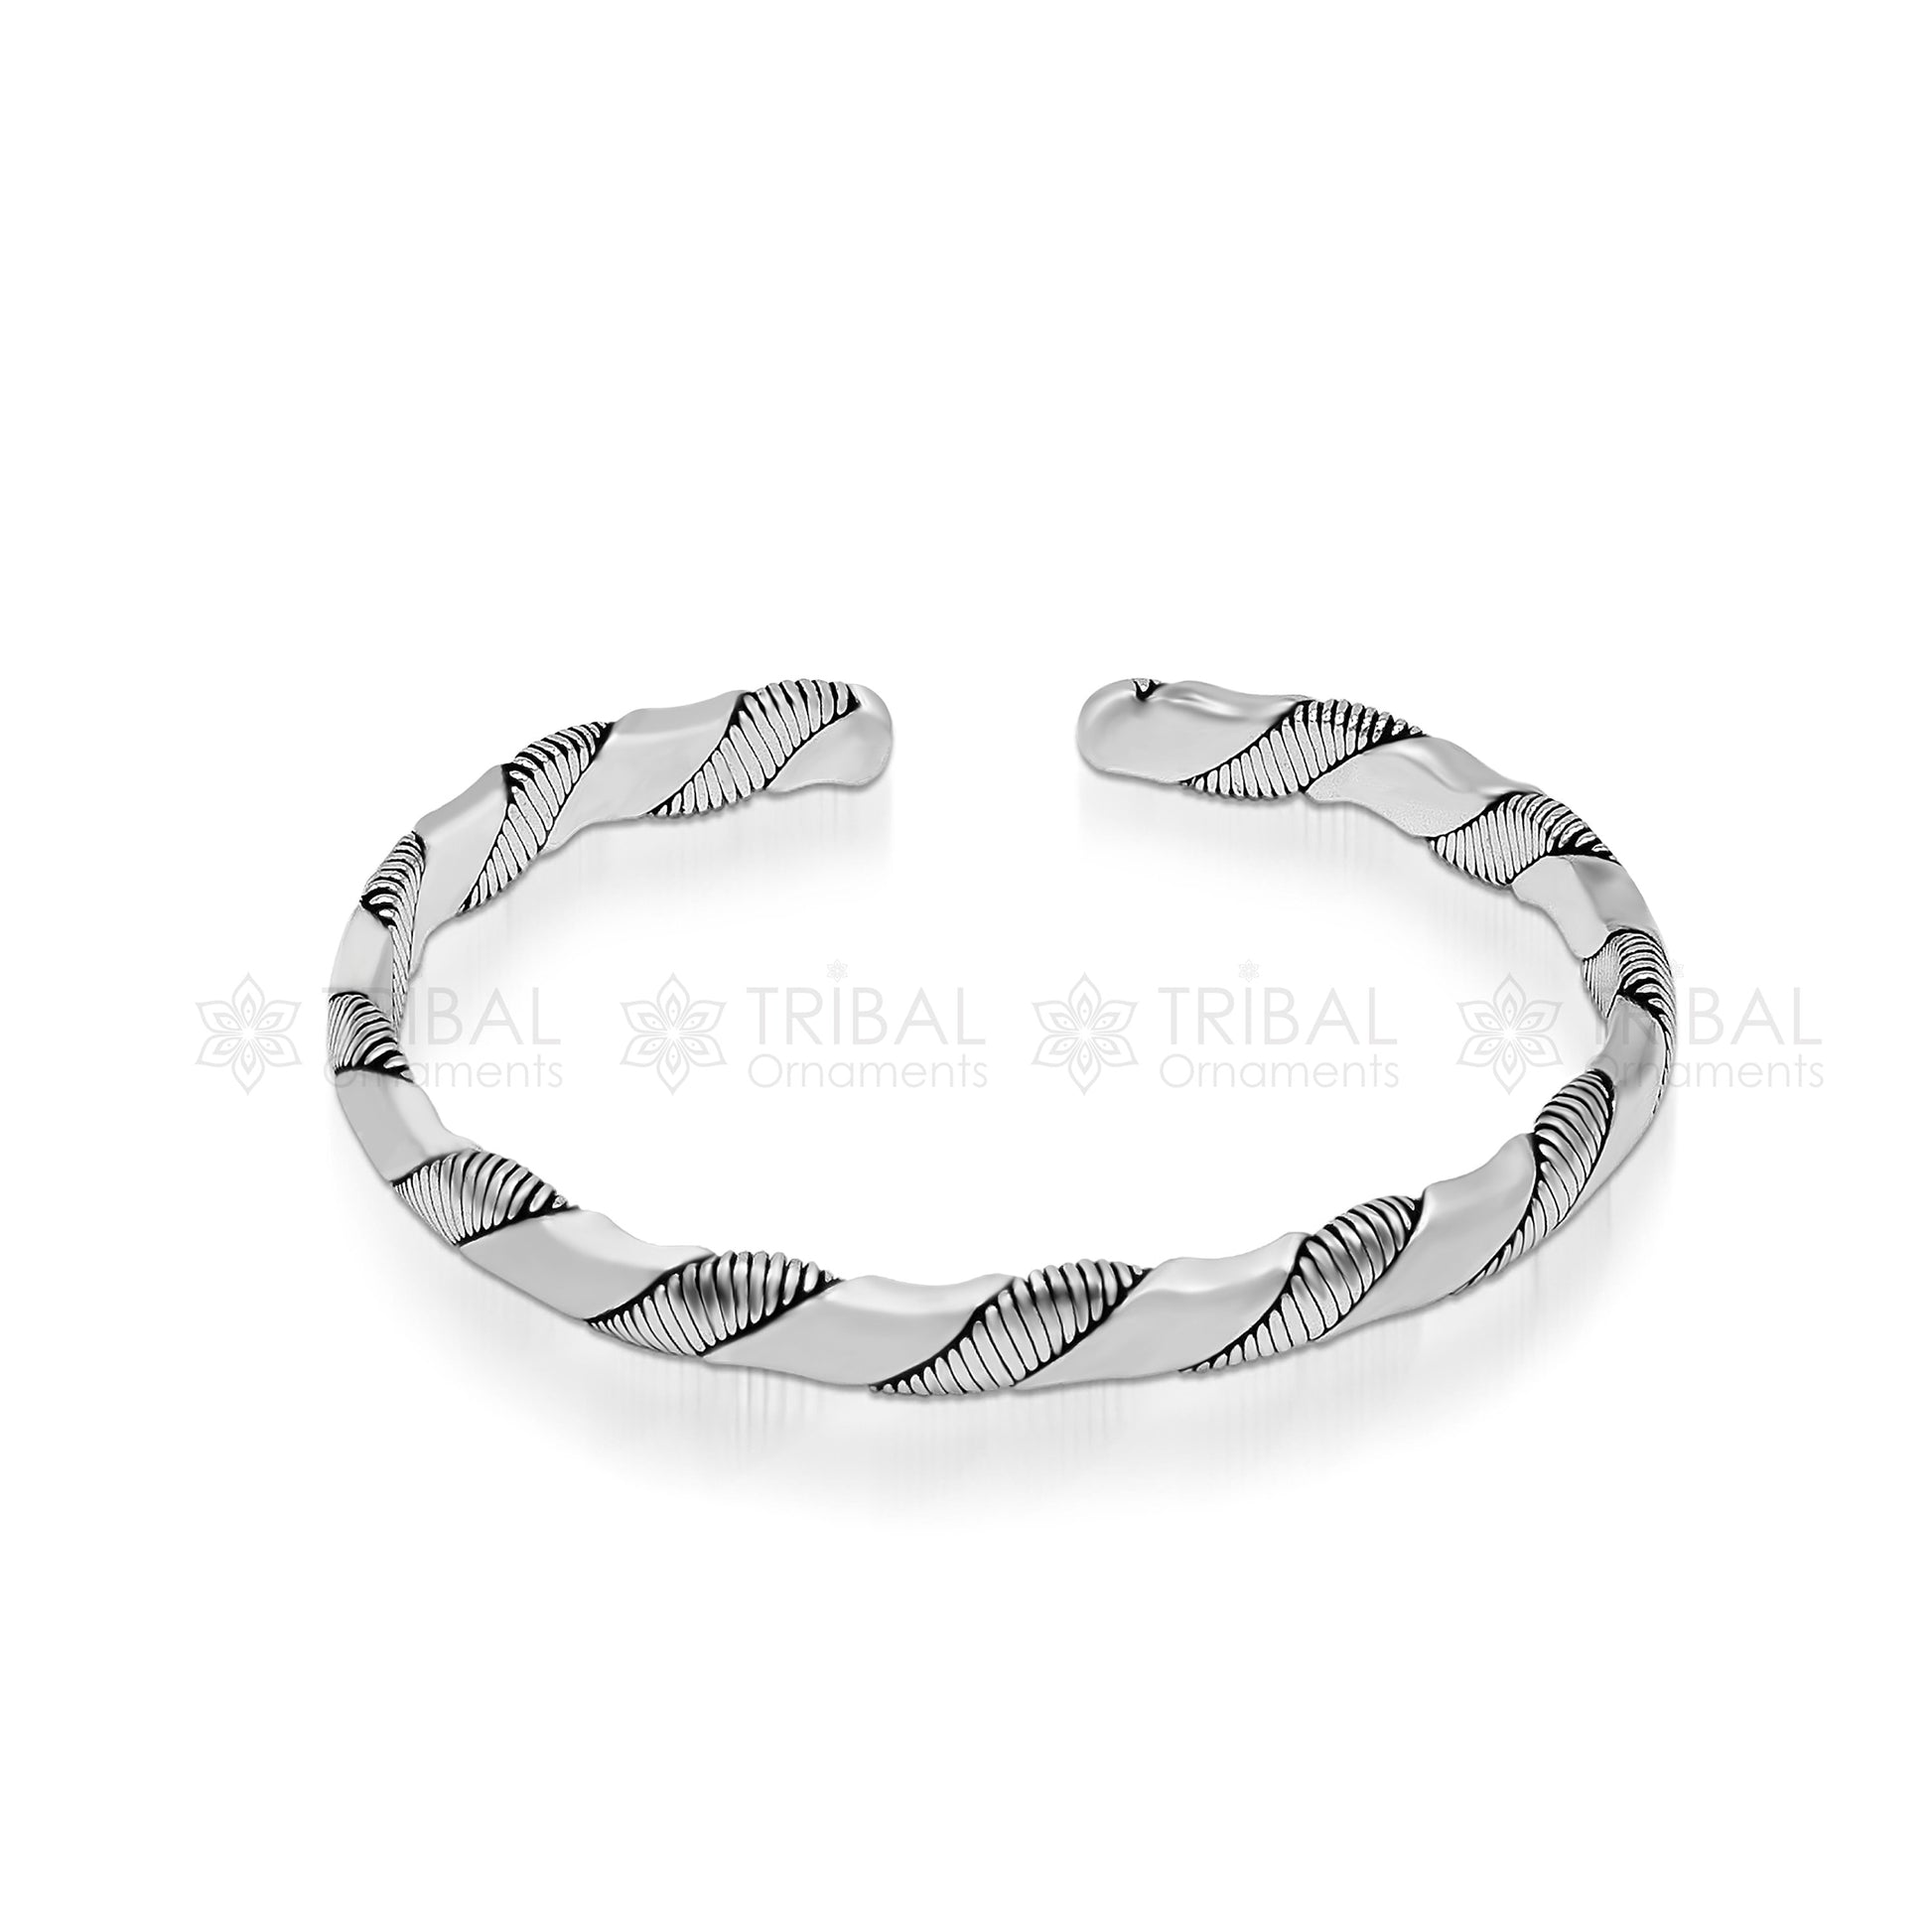 Plain shiny solid 925 sterling silver handmade adjustable cuff bangle bracelet unsex gifting jewelry CUFF223 - TRIBAL ORNAMENTS